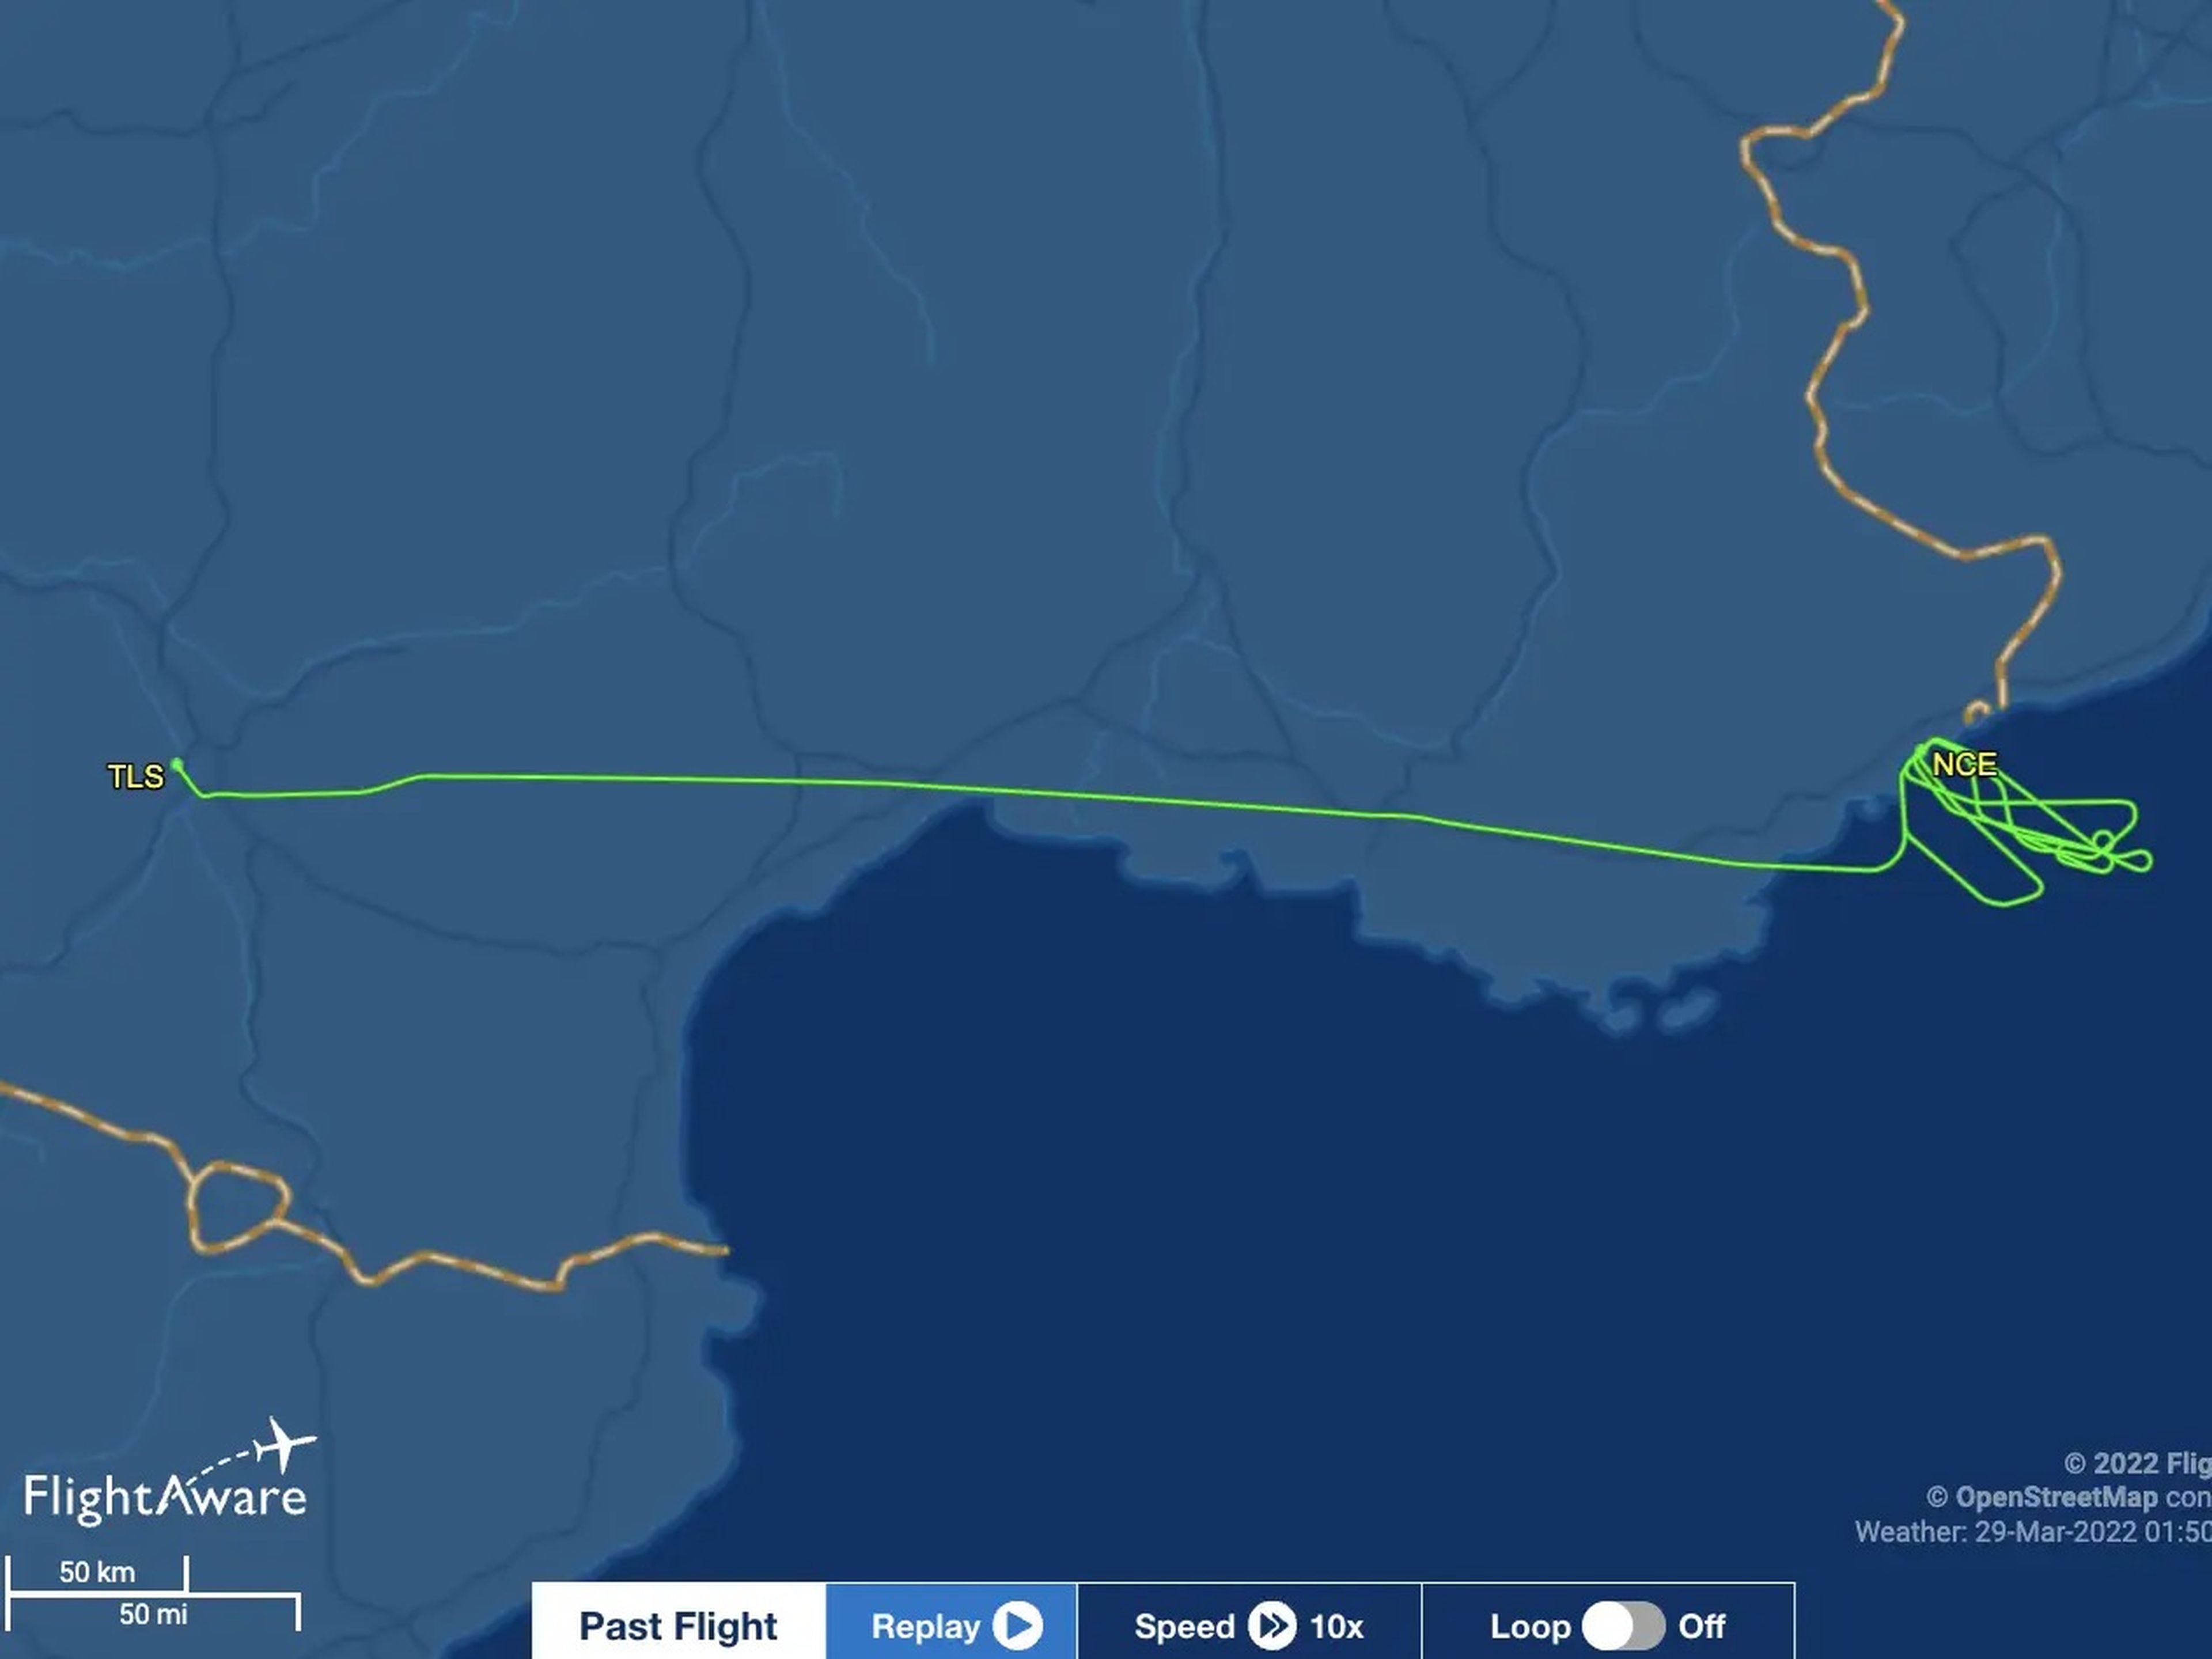 A380 test flight from Toulouse to Nice.